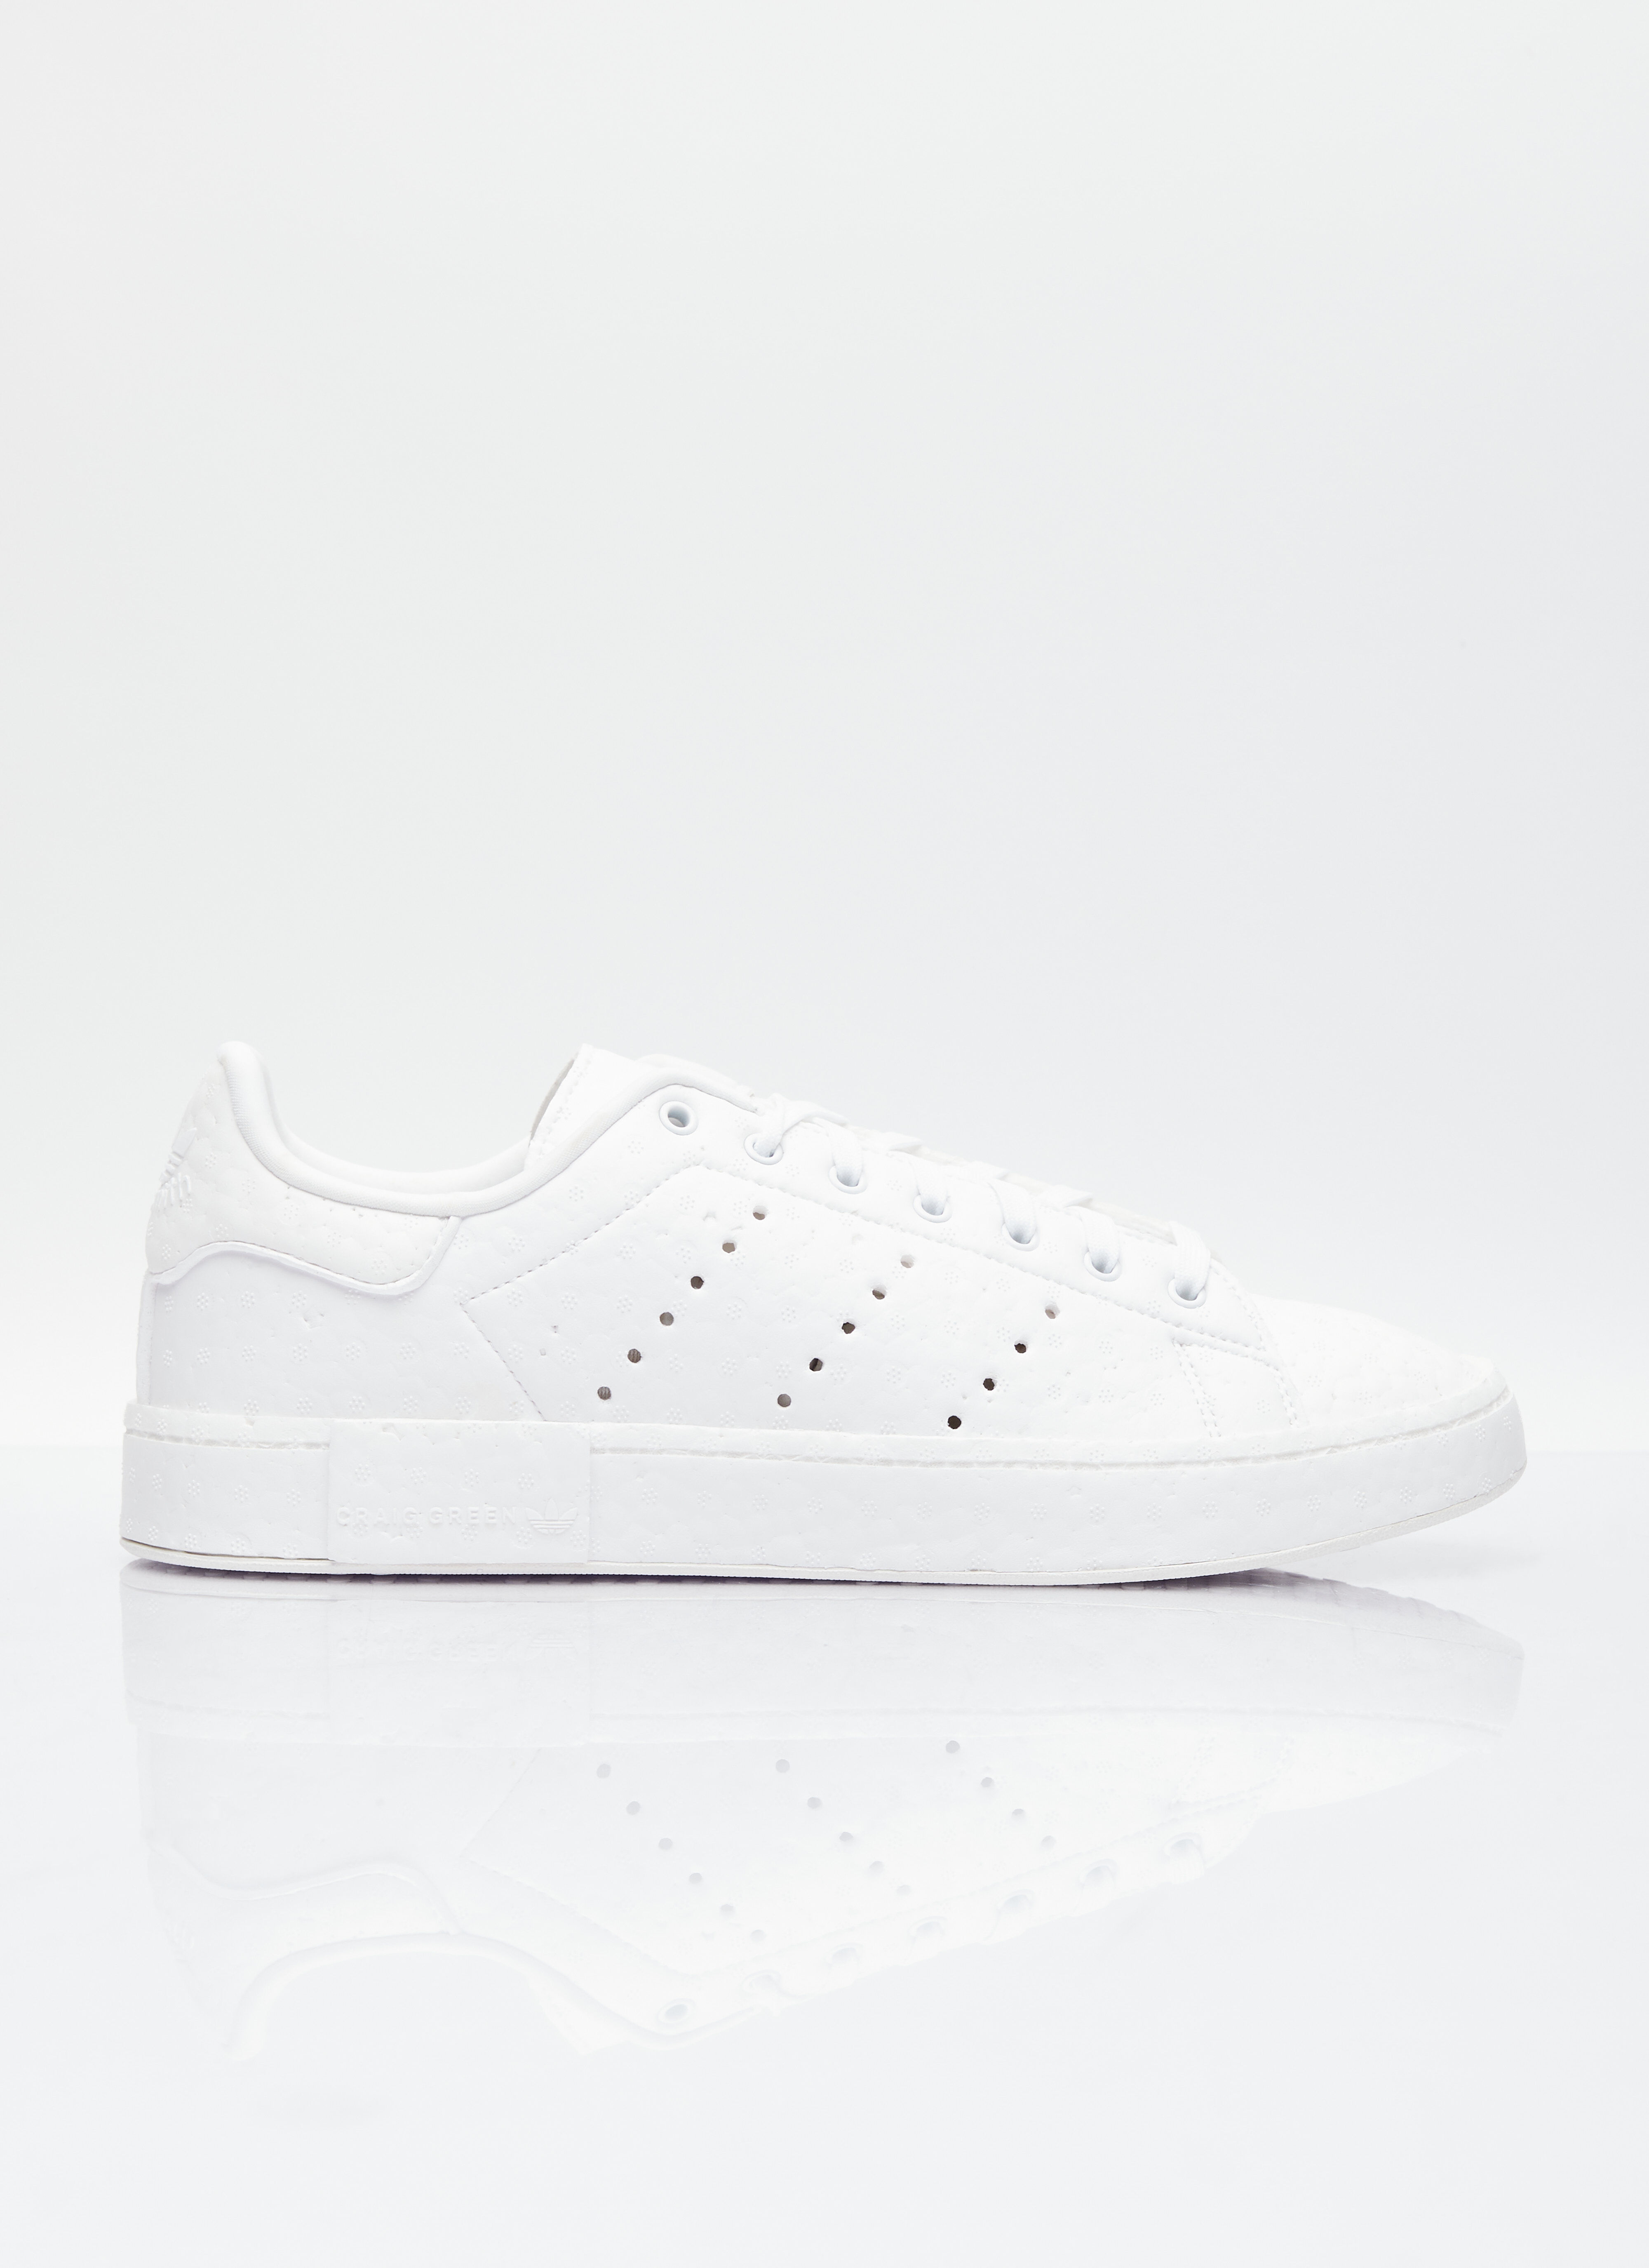 adidas by Craig Green Stan Smith Boost Sneakers White adg0154001